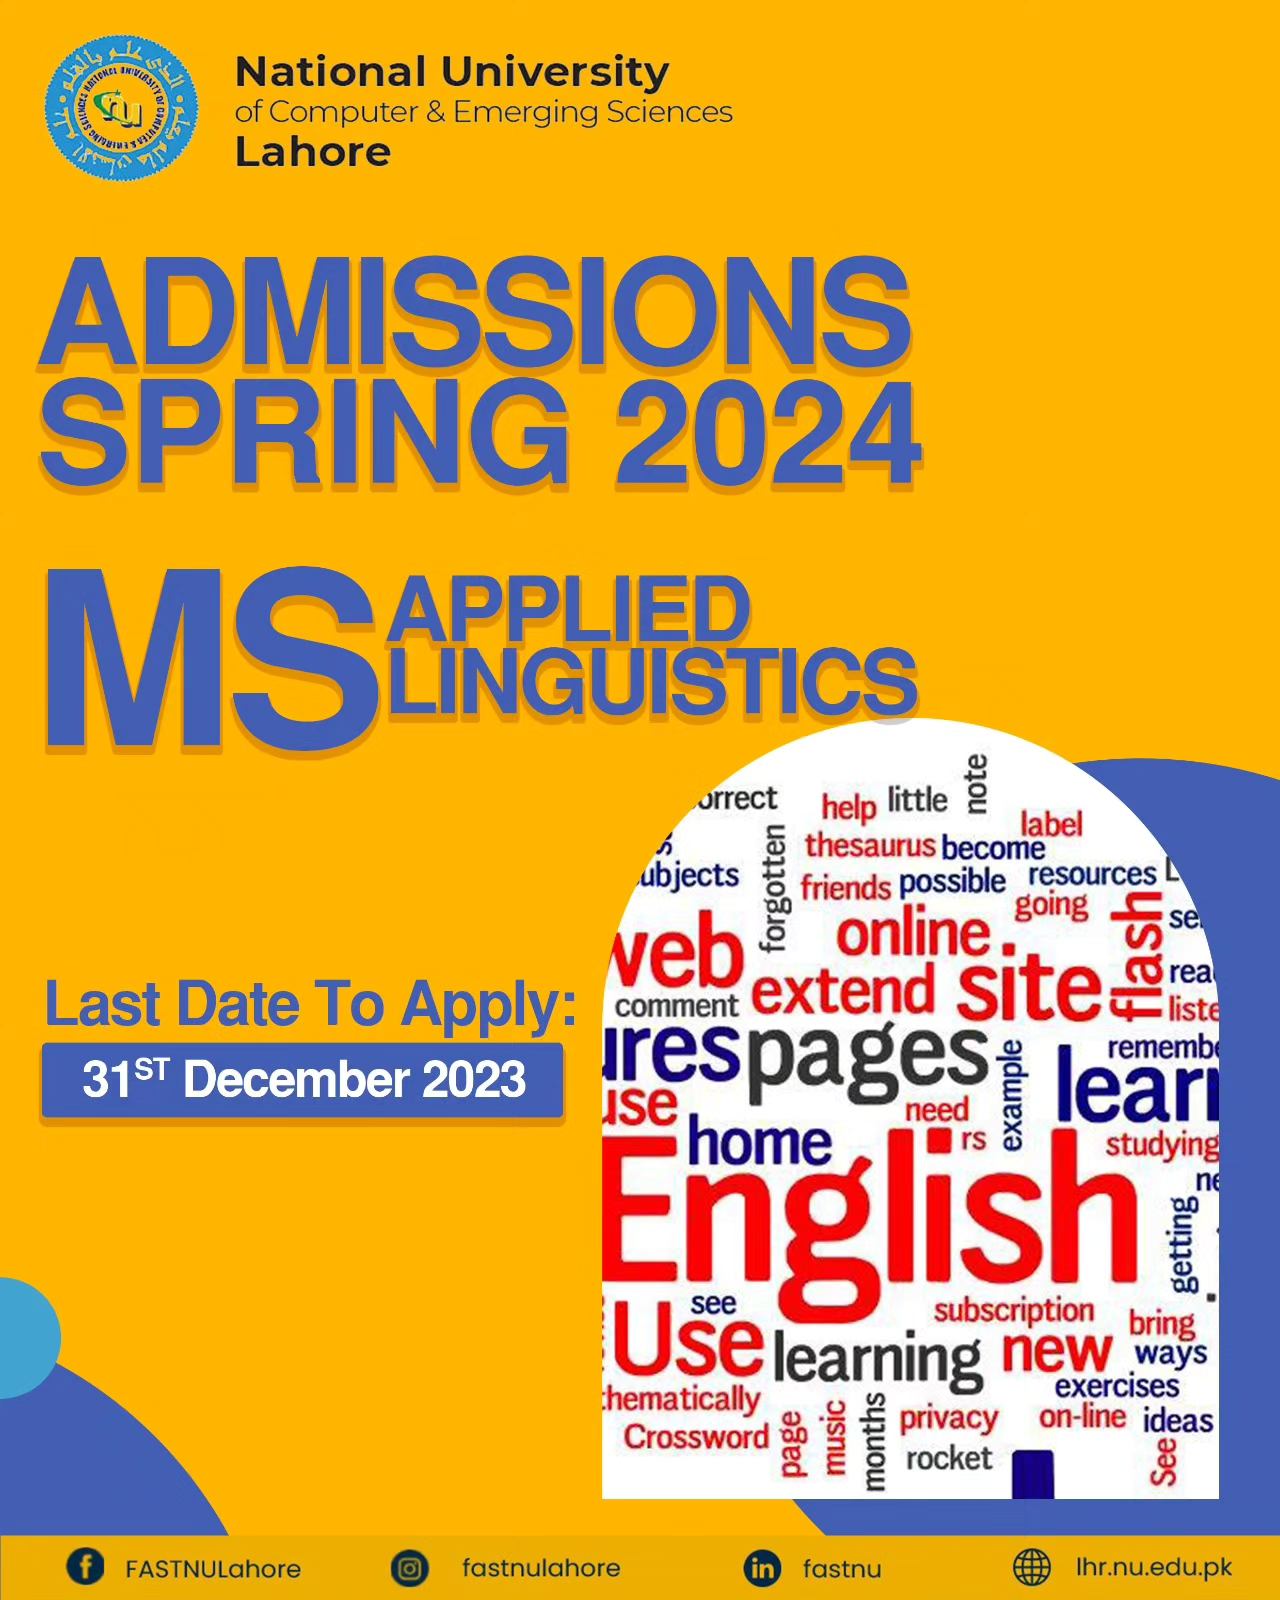 FAST University Islamabad Admission 2024 deadline for MS and PhD